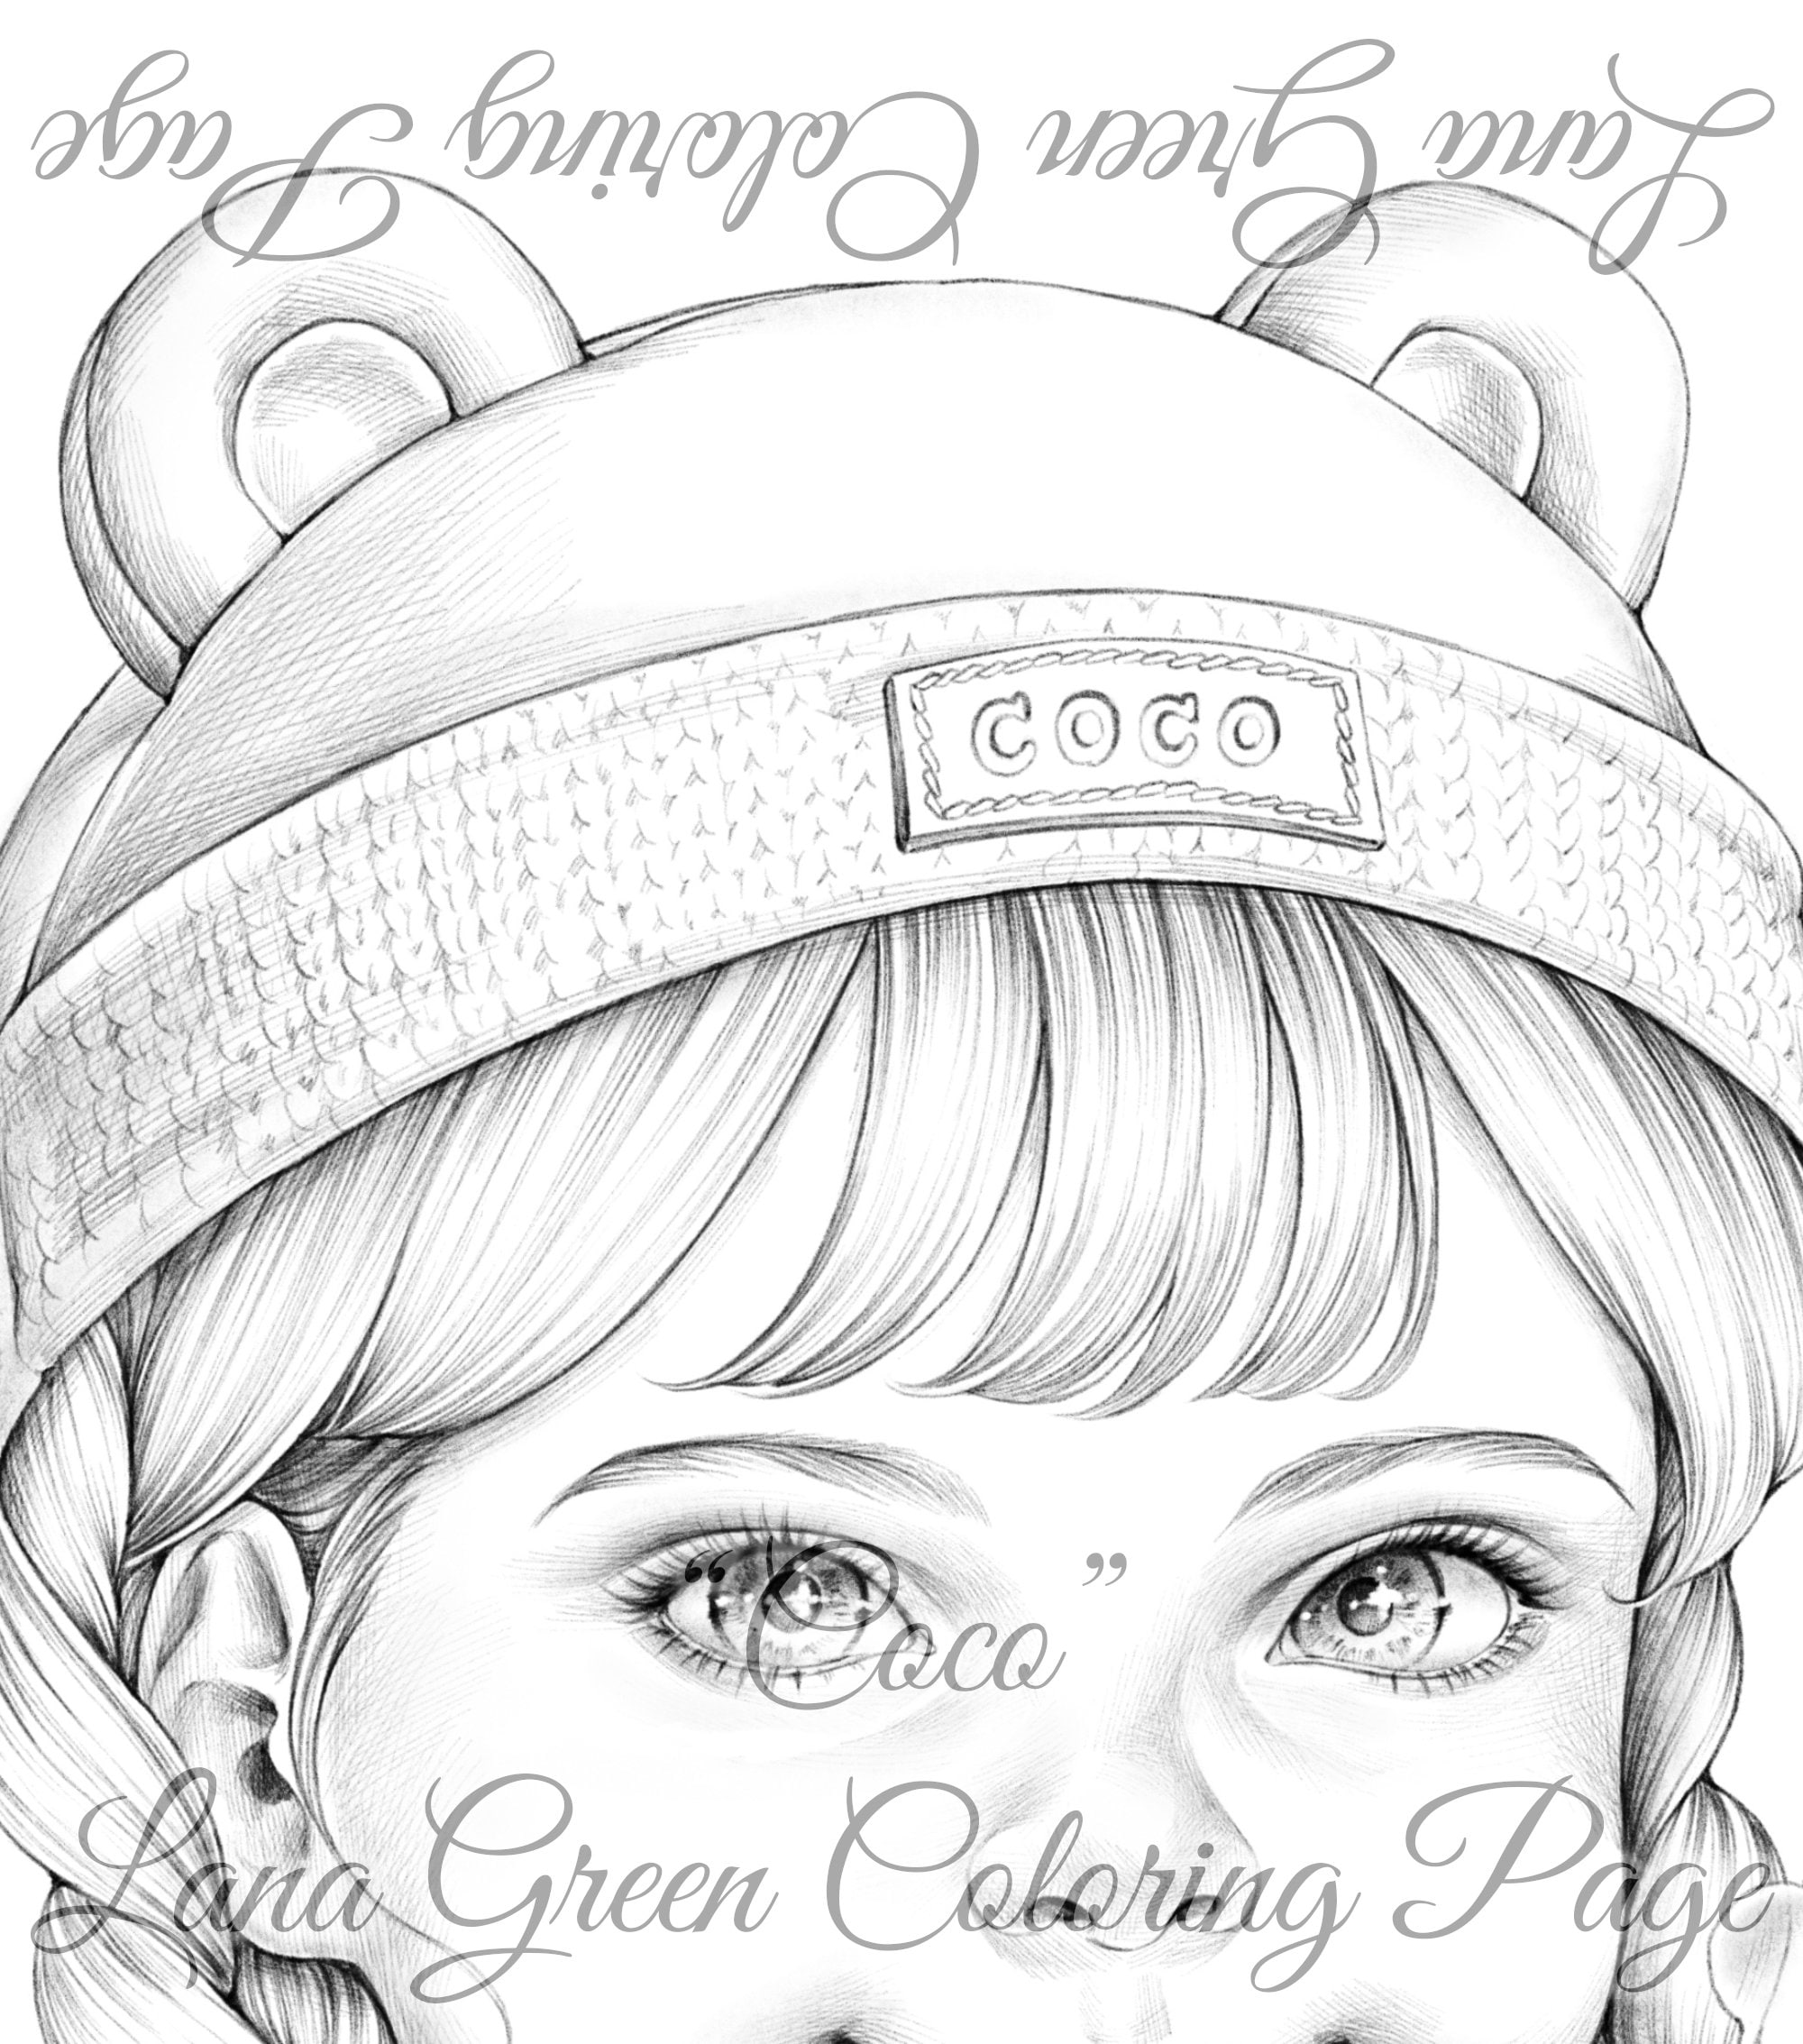 Coco coloring page for adults grayscale coloring page instant download lana green art jpeg pdf